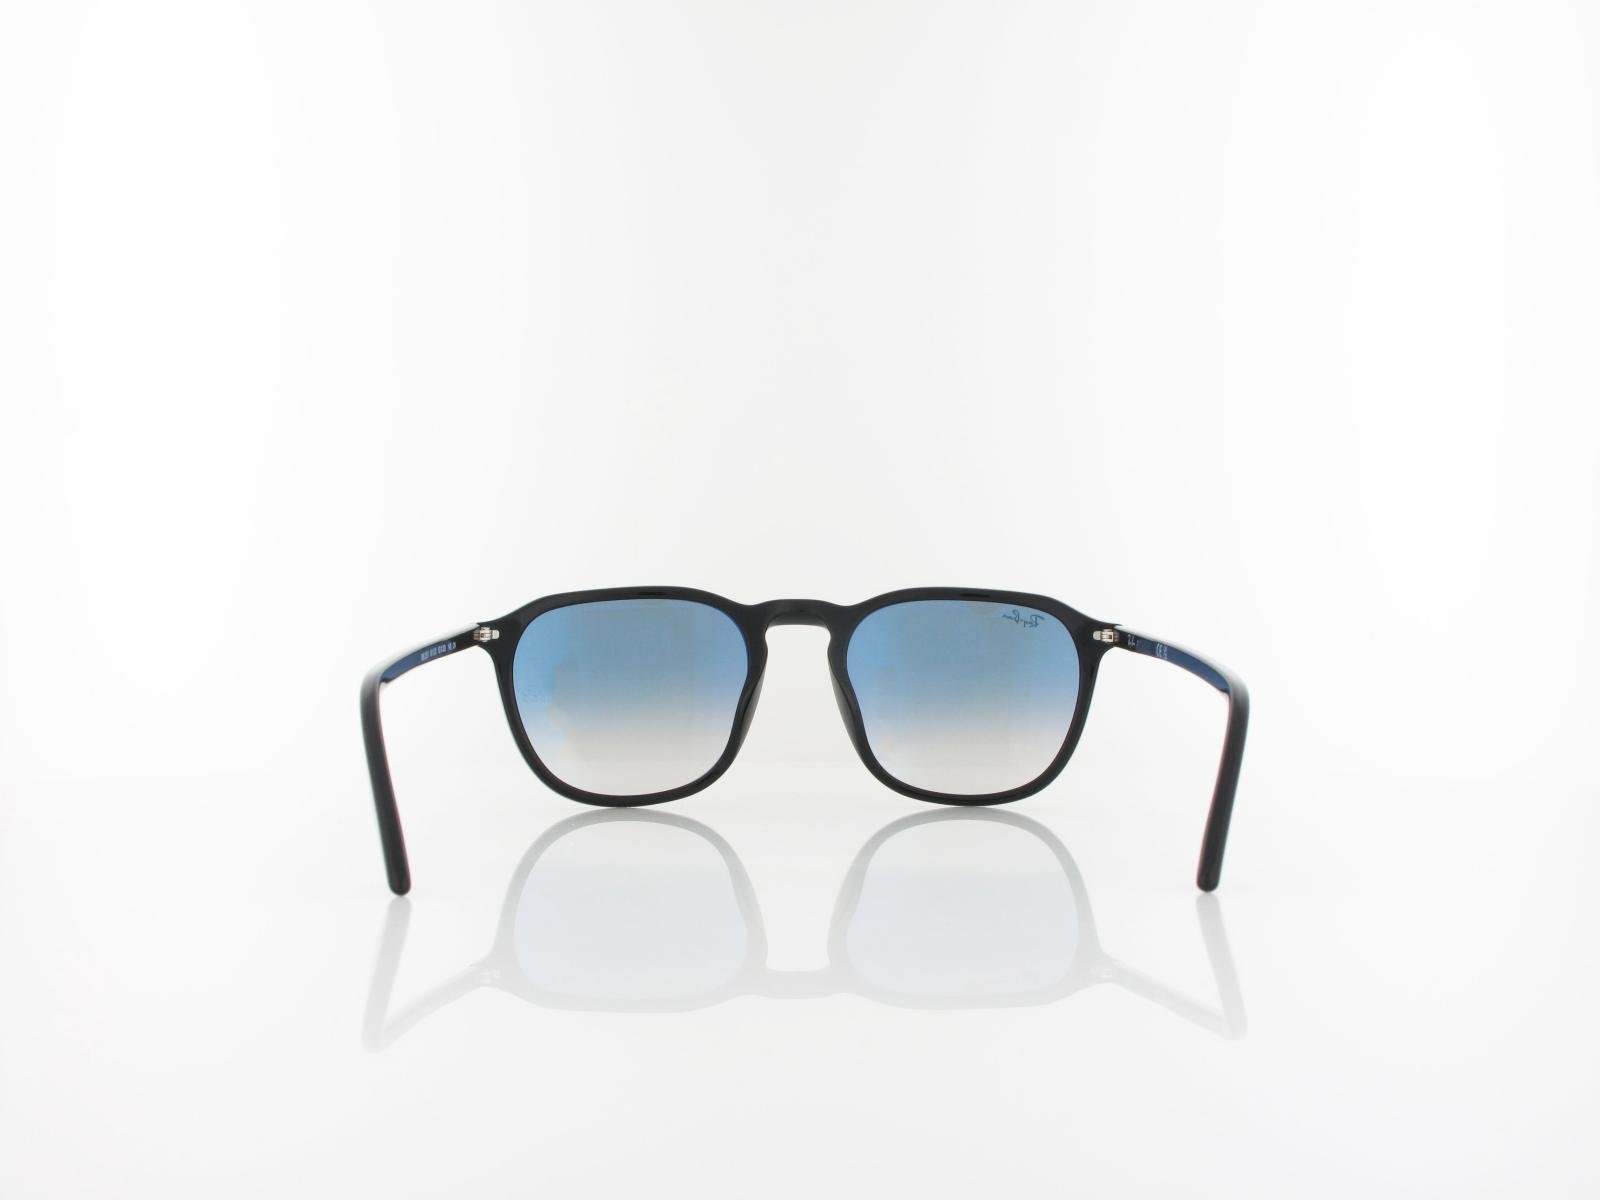 Ray Ban | RB2203 90132 52 | black / clear gradient grey